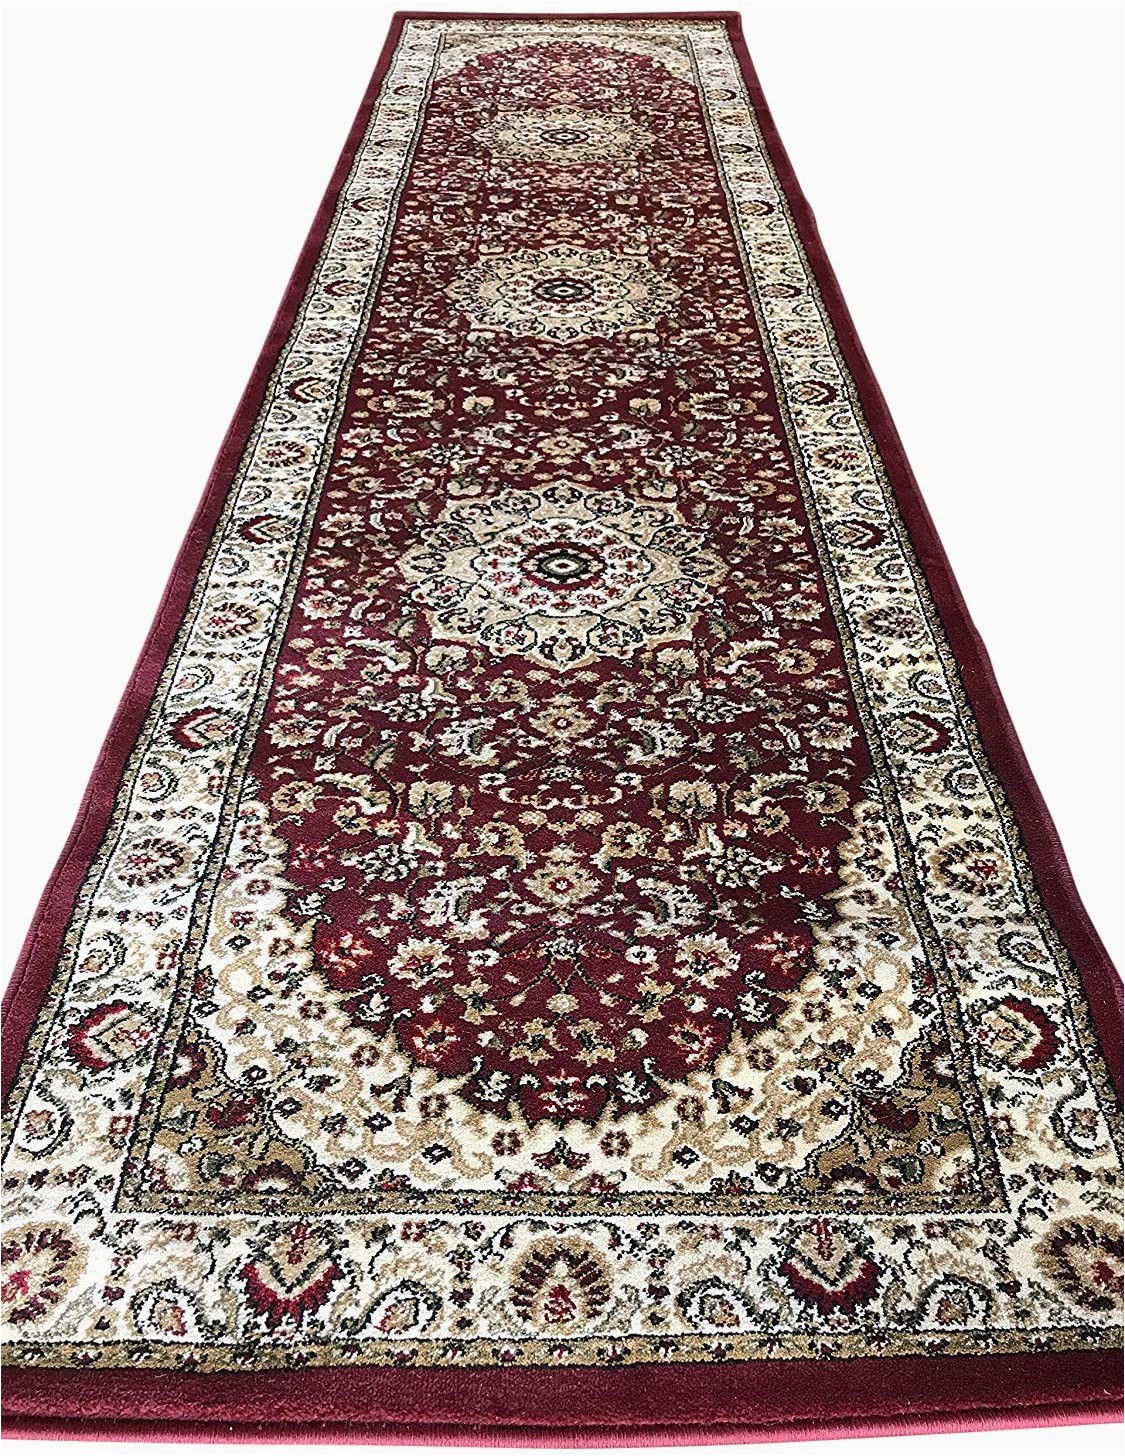 Area Rugs with Burgundy In them Traditional Runner Persian 500 000 Point area Rug Burgundy Design 401 2 Feet X 7 Feet 3 Inch